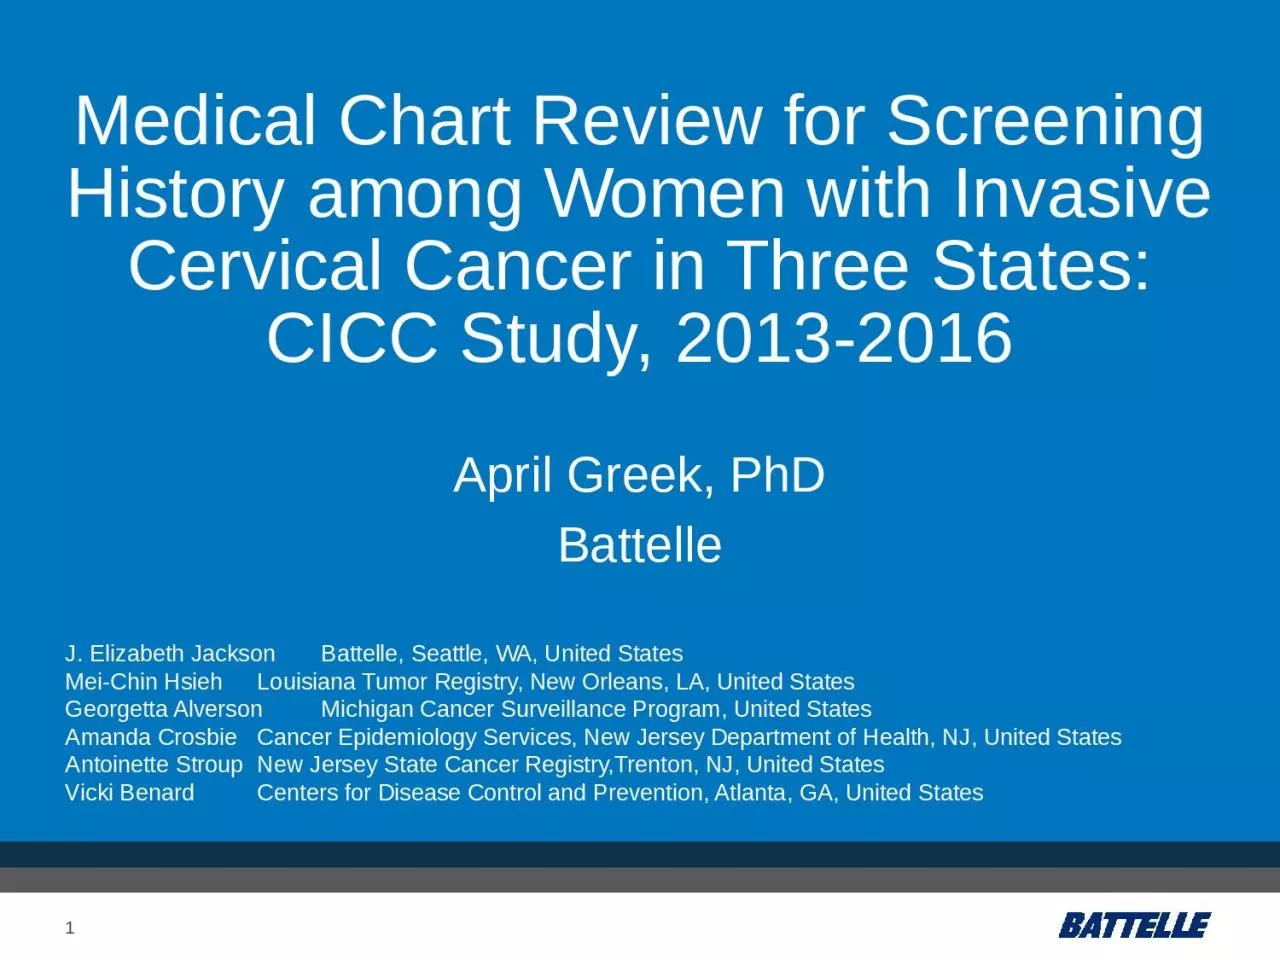 Medical Chart Review for Screening History among Women with Invasive Cervical Cancer in